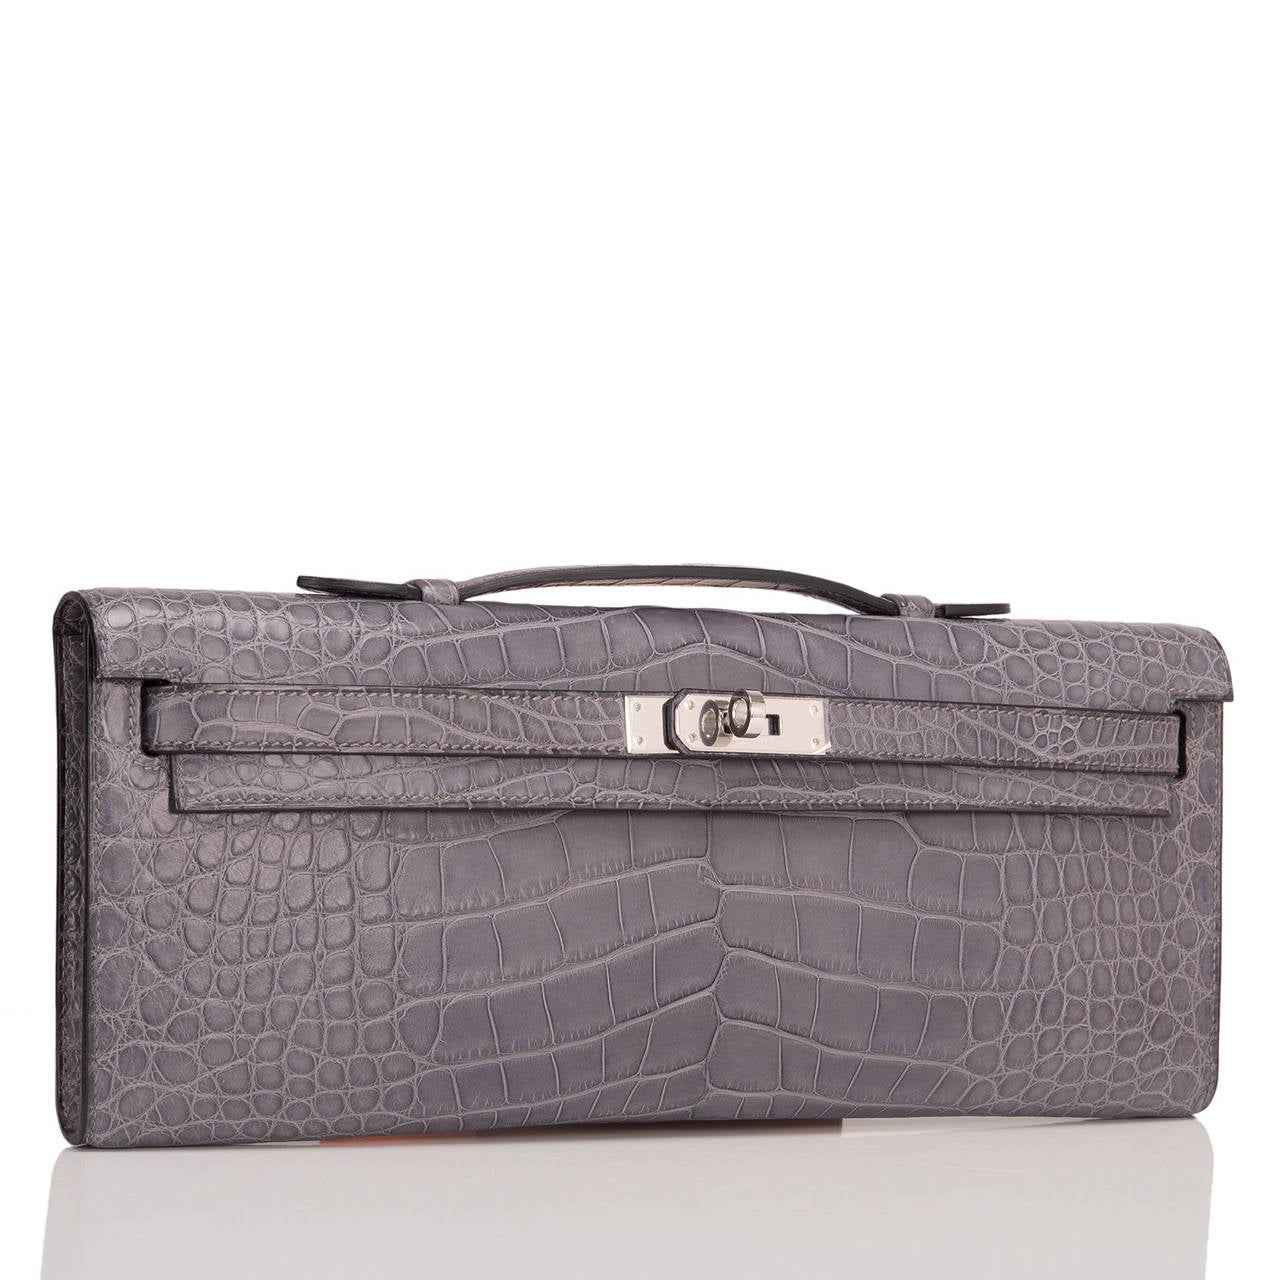 Hermes Gris Paris Matte Alligator Kelly Cut with palladium hardware.

This style features tonal stitching, front straps with toggle closure and a top flat handle.

The interior is lined in Gris Paris chèvre leather and features an open wall